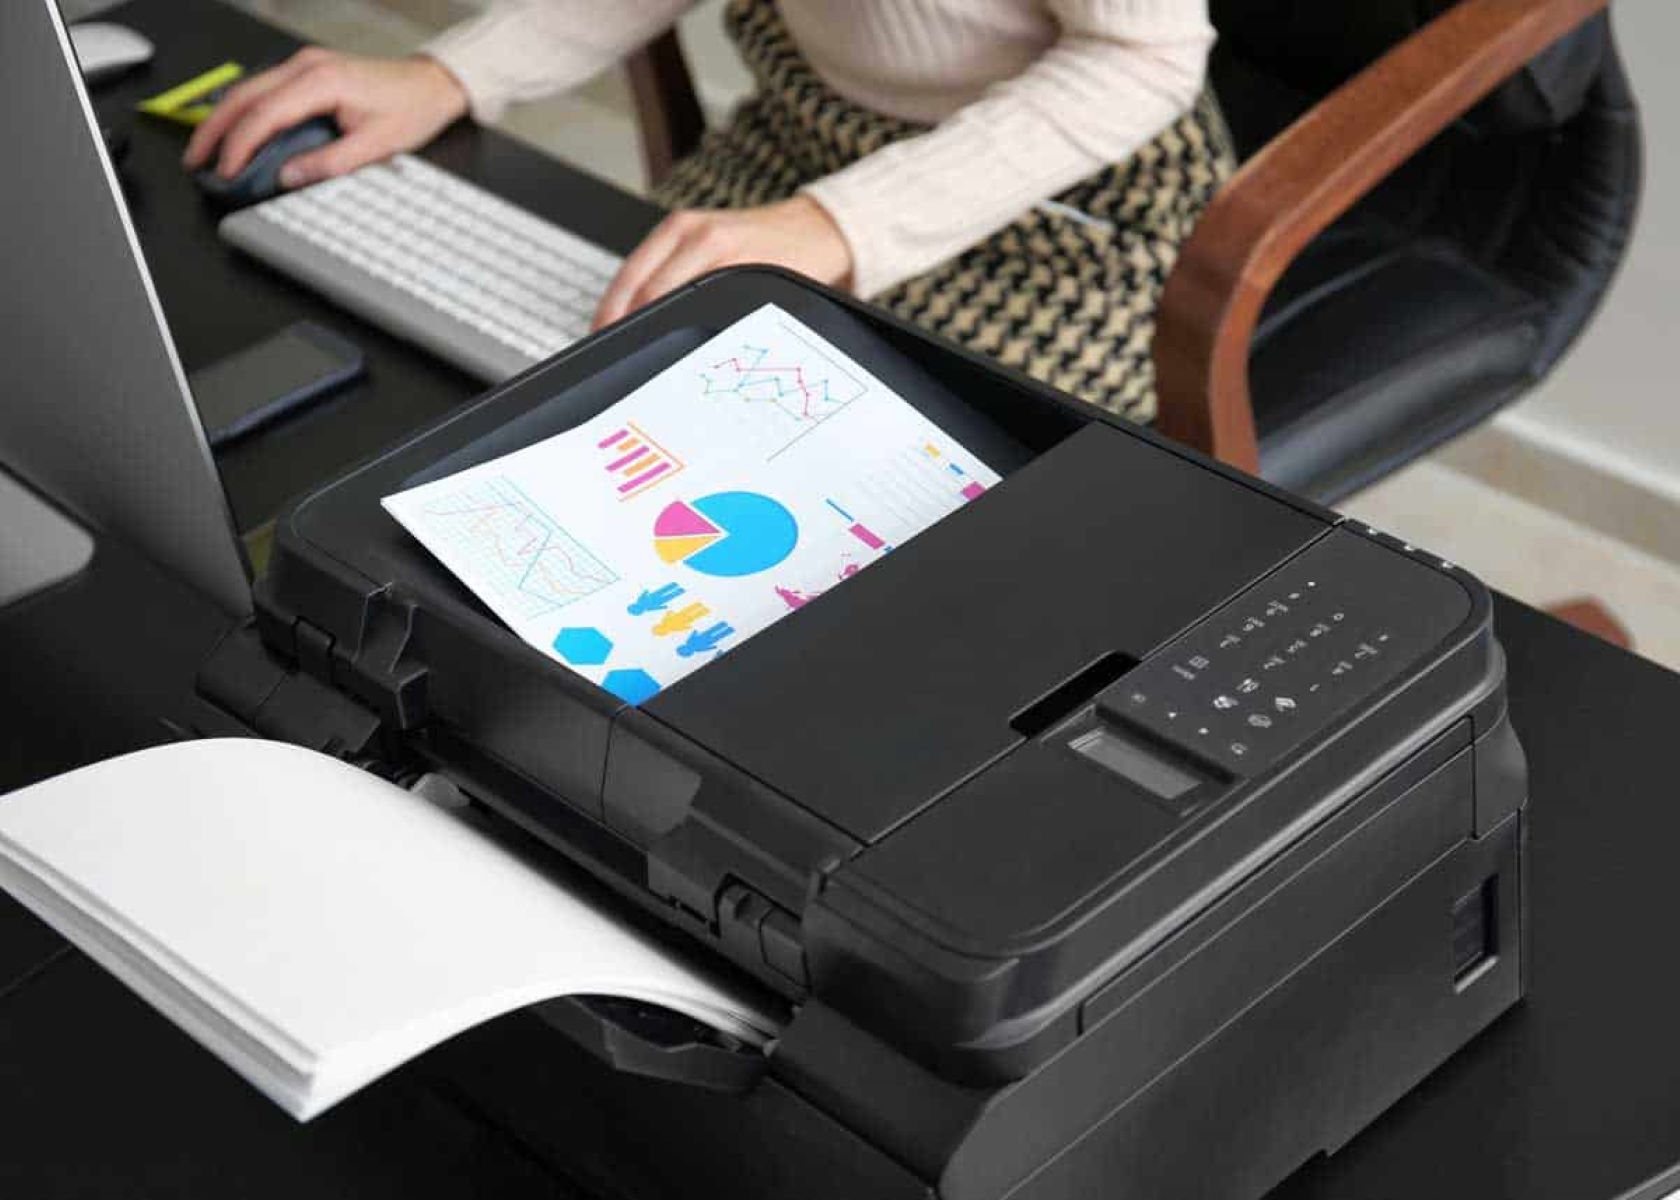 What Does “Collate” On A Printer Mean